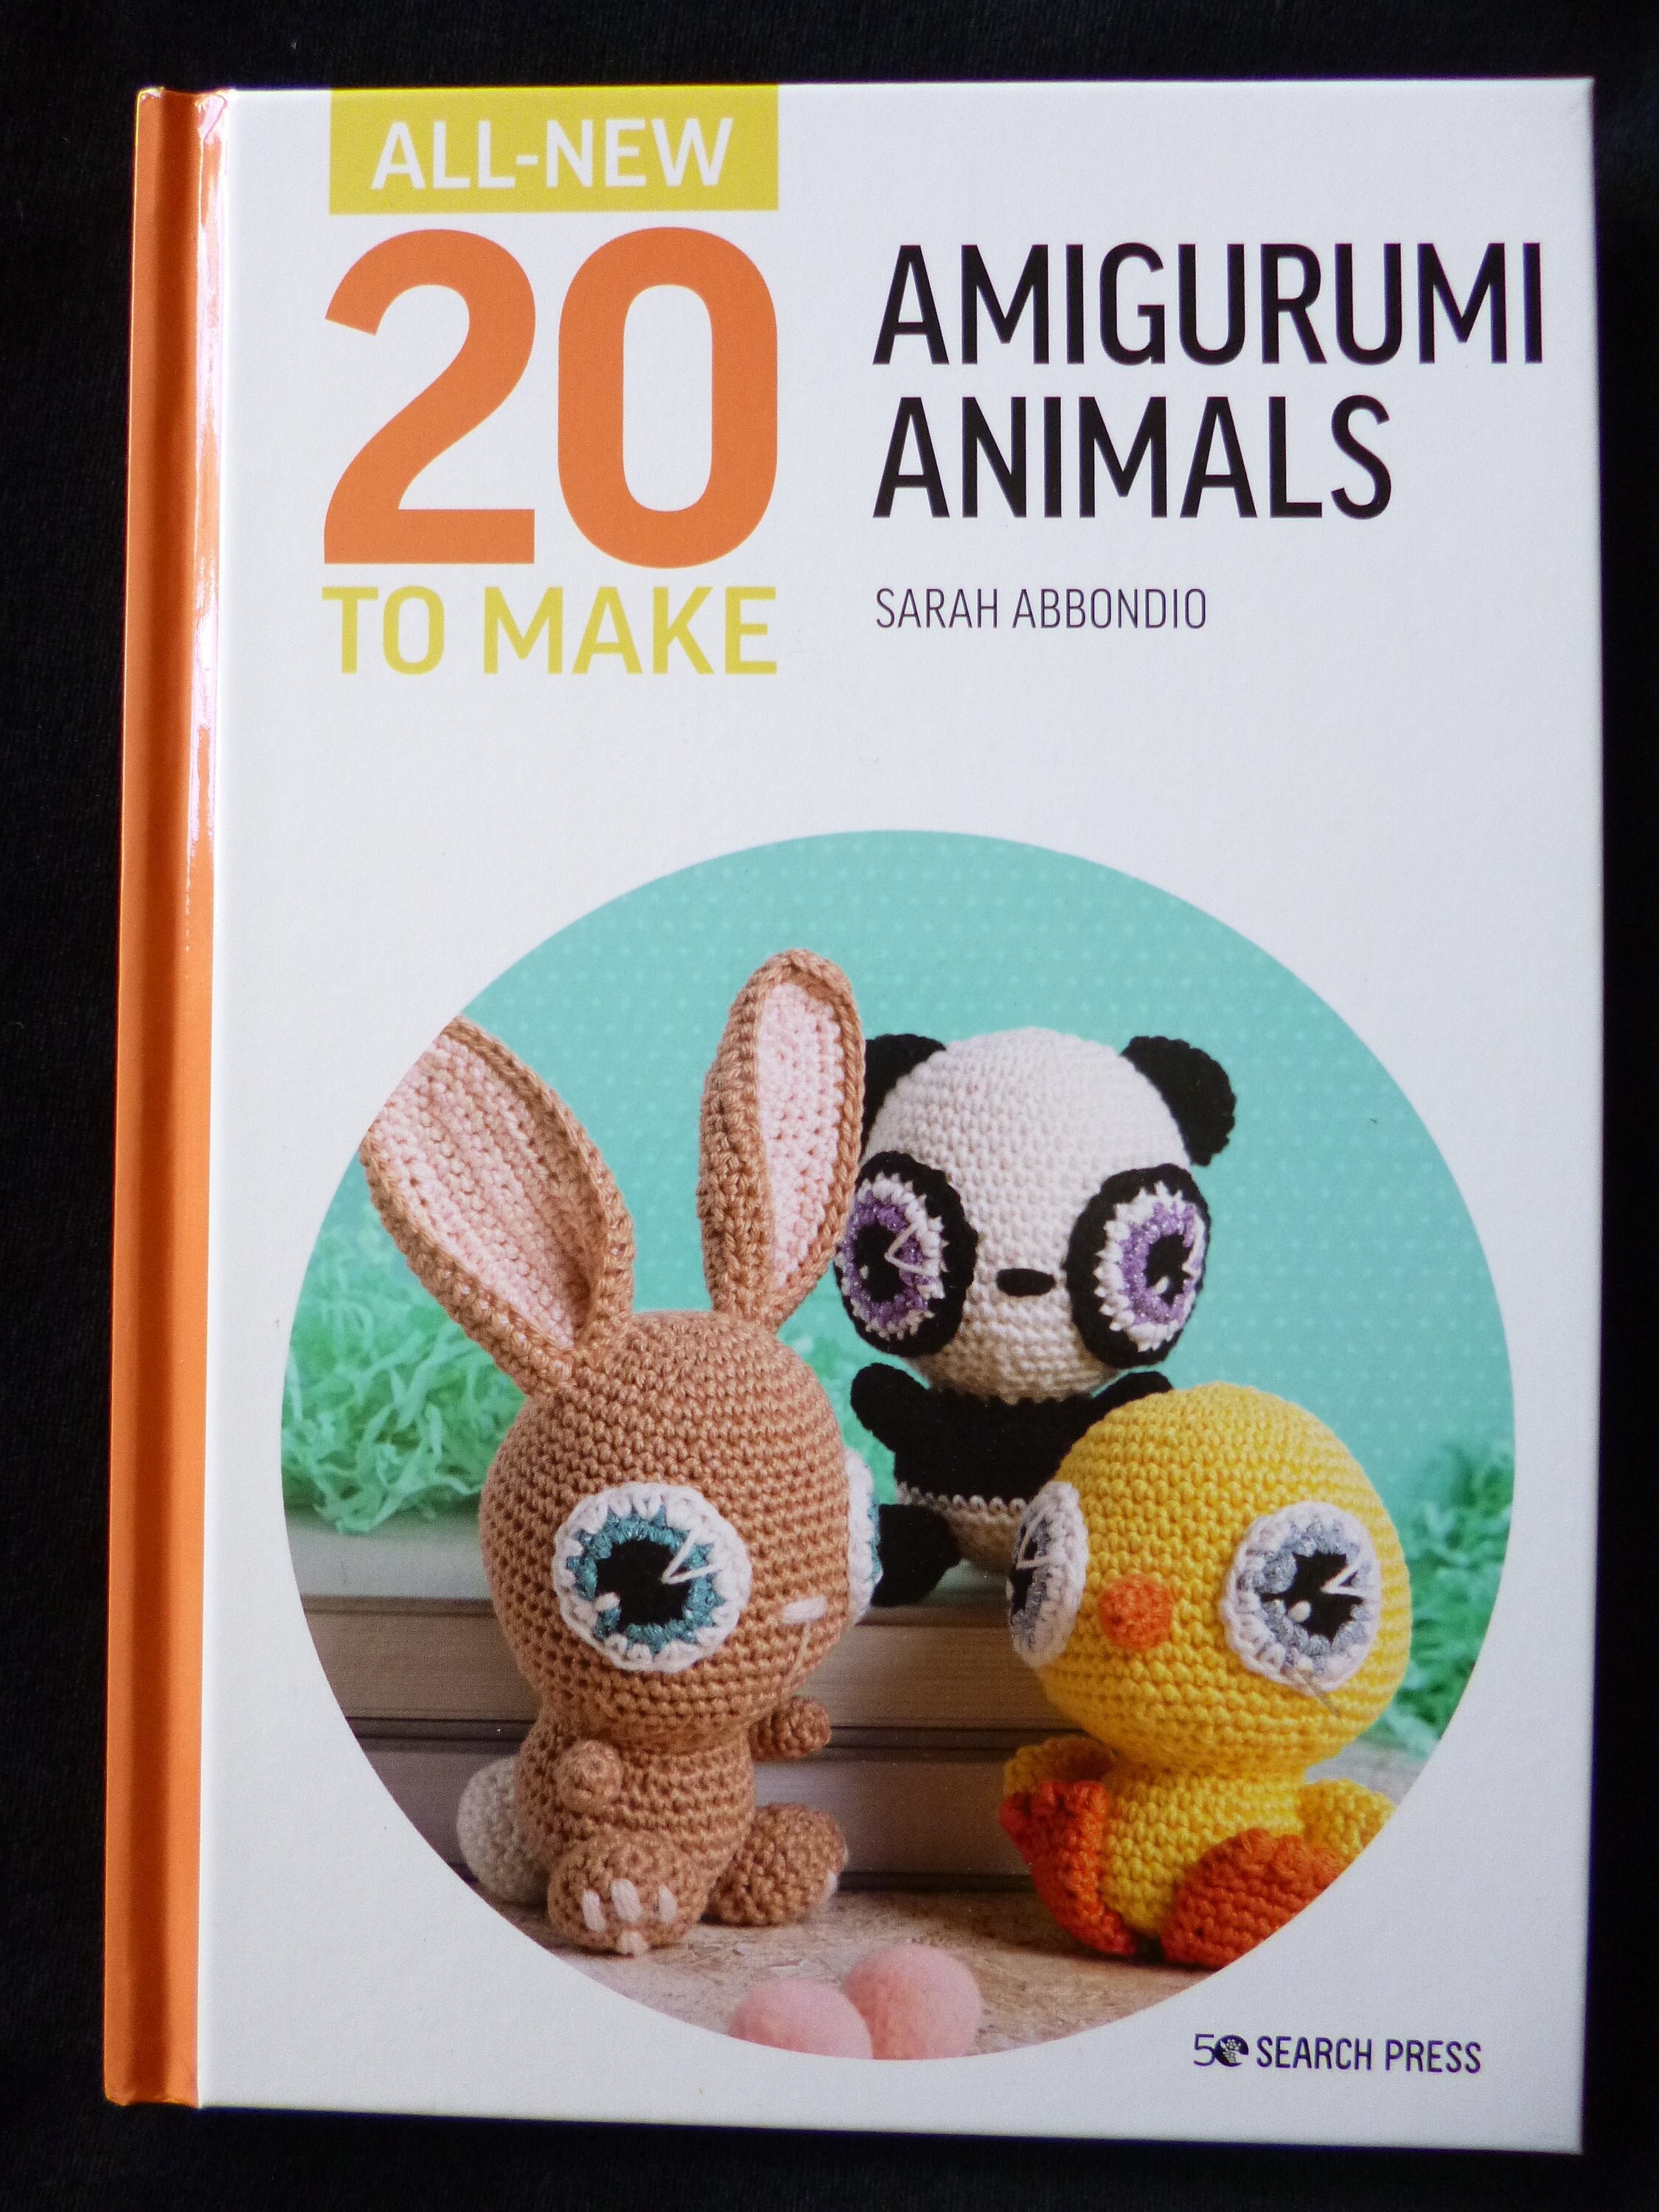 Mabel Bunny and Co Book. Crochet Amigurumi Pattern Book by Claire Gelder of  Wool Couture 